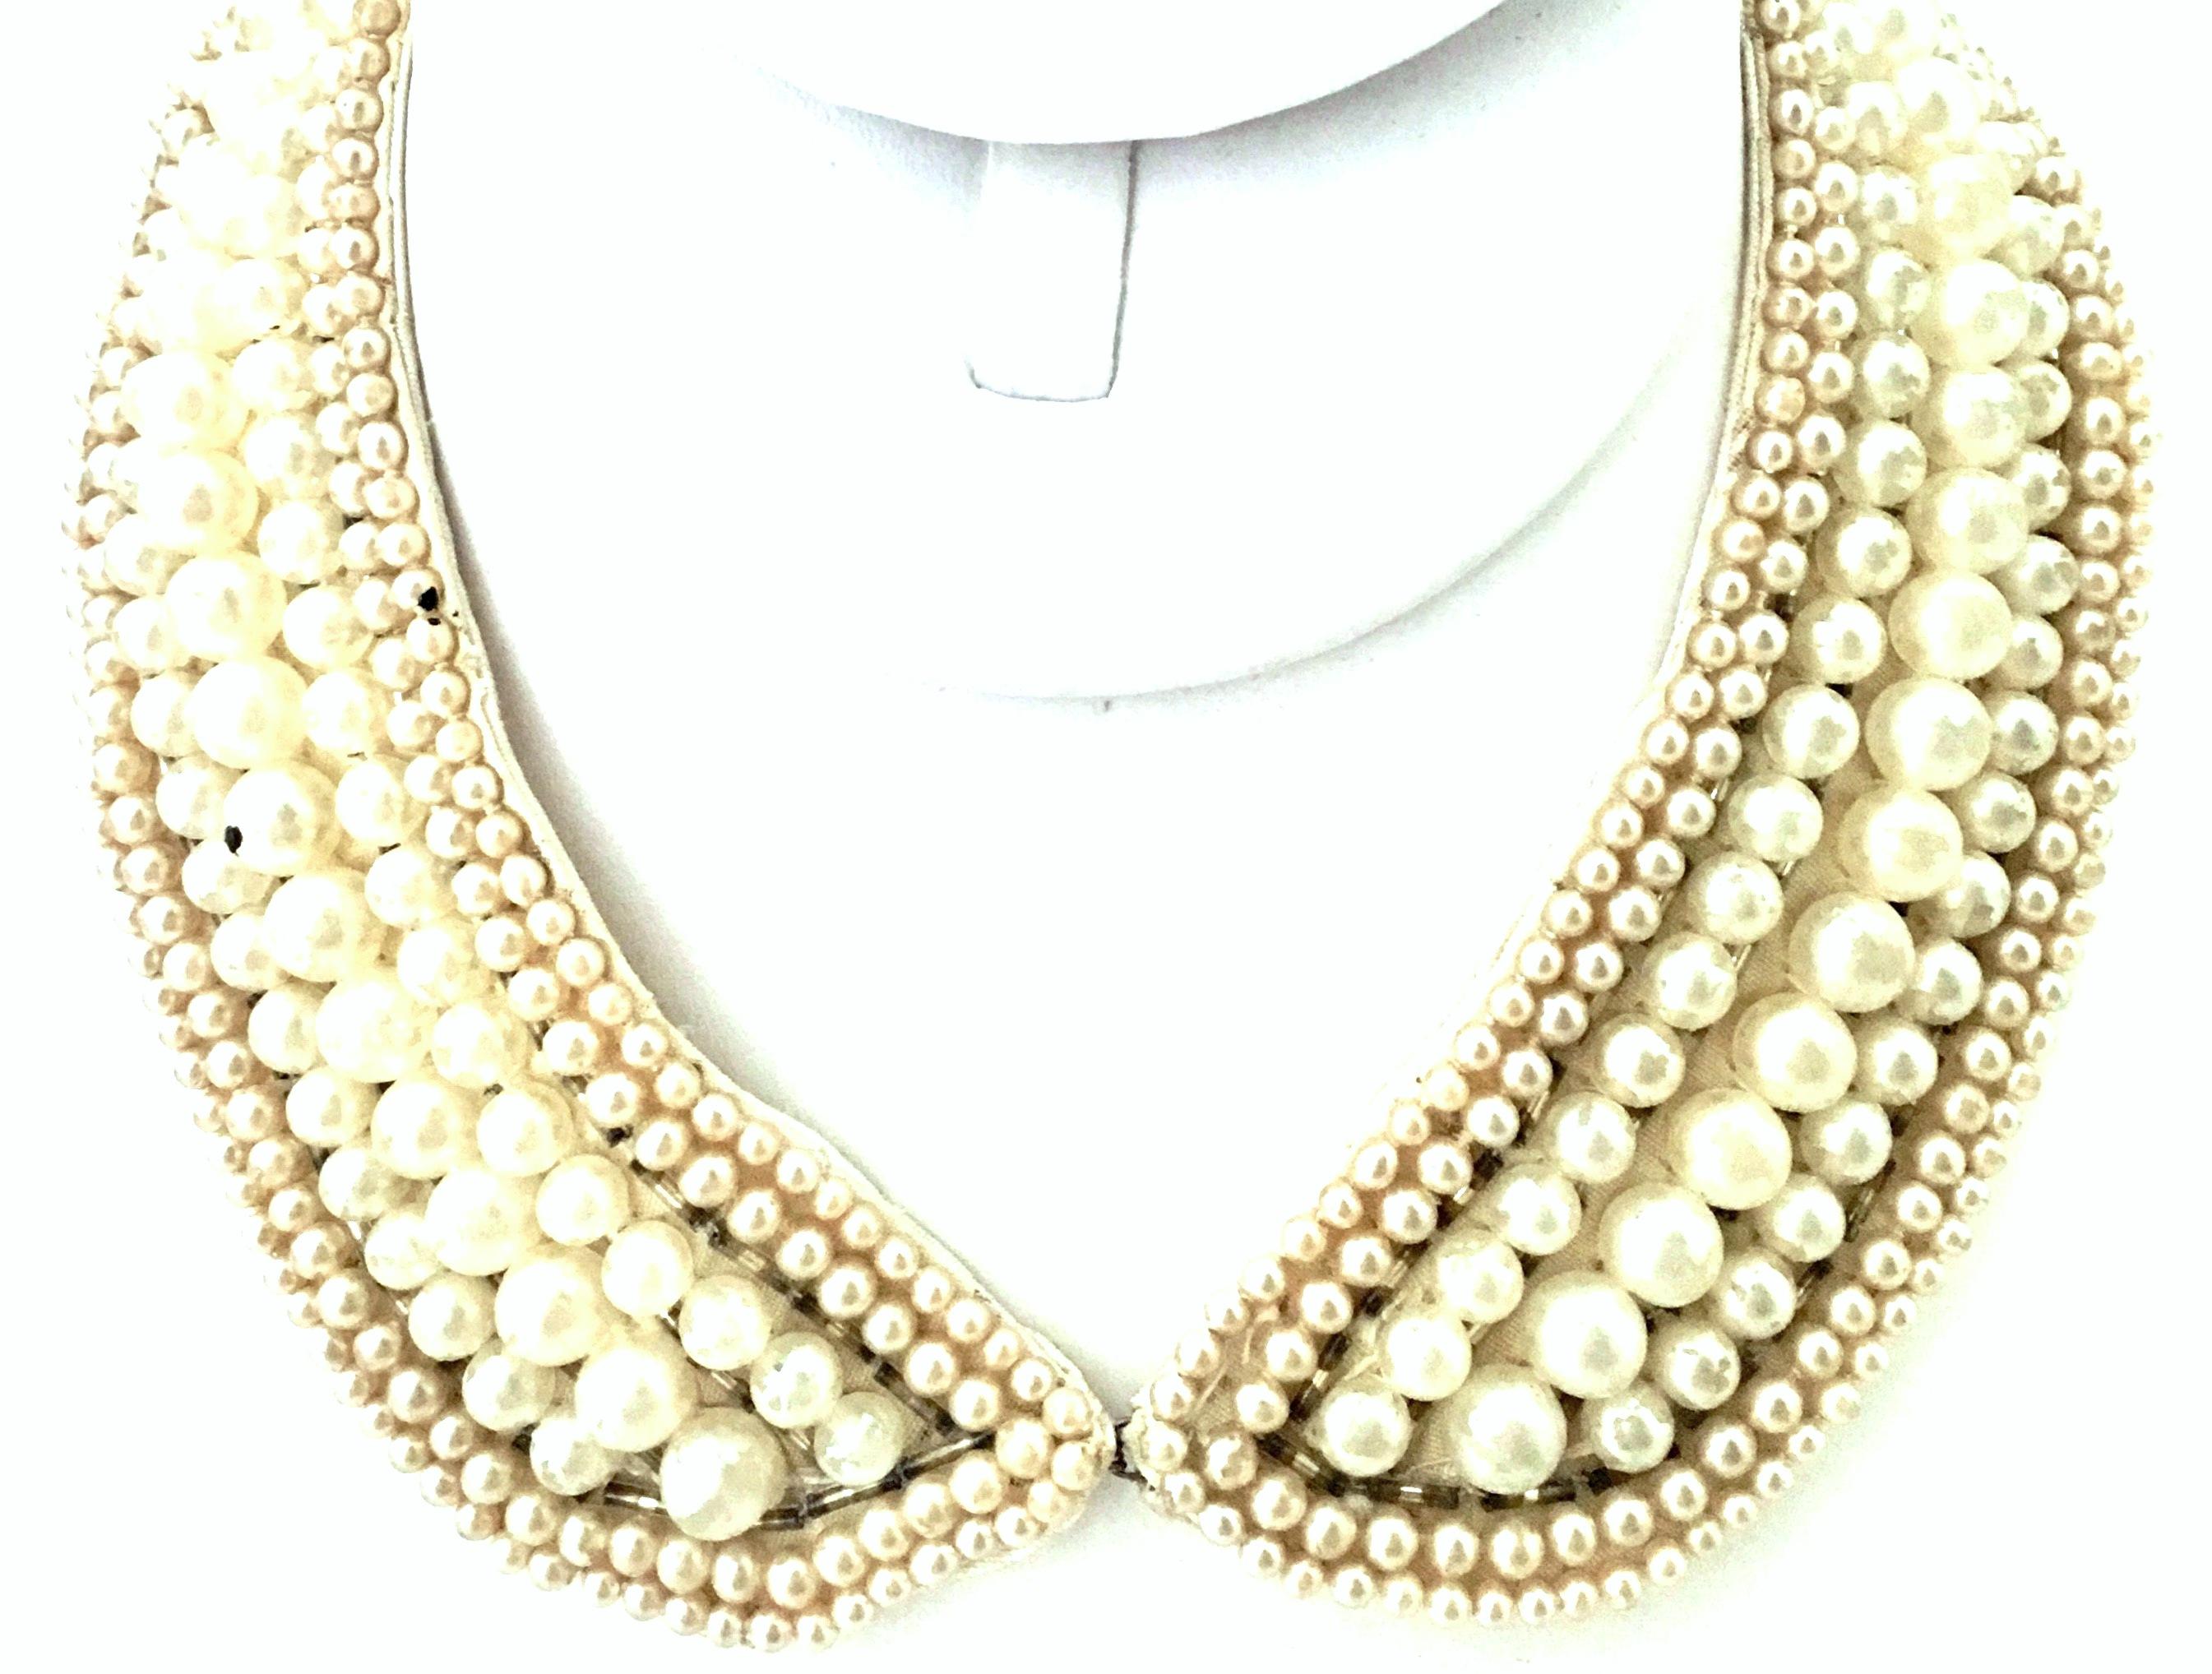 Women's or Men's Mid-Century Japanese Faux Pearl & Crystal Rhinestone Choker Collar Necklace For Sale